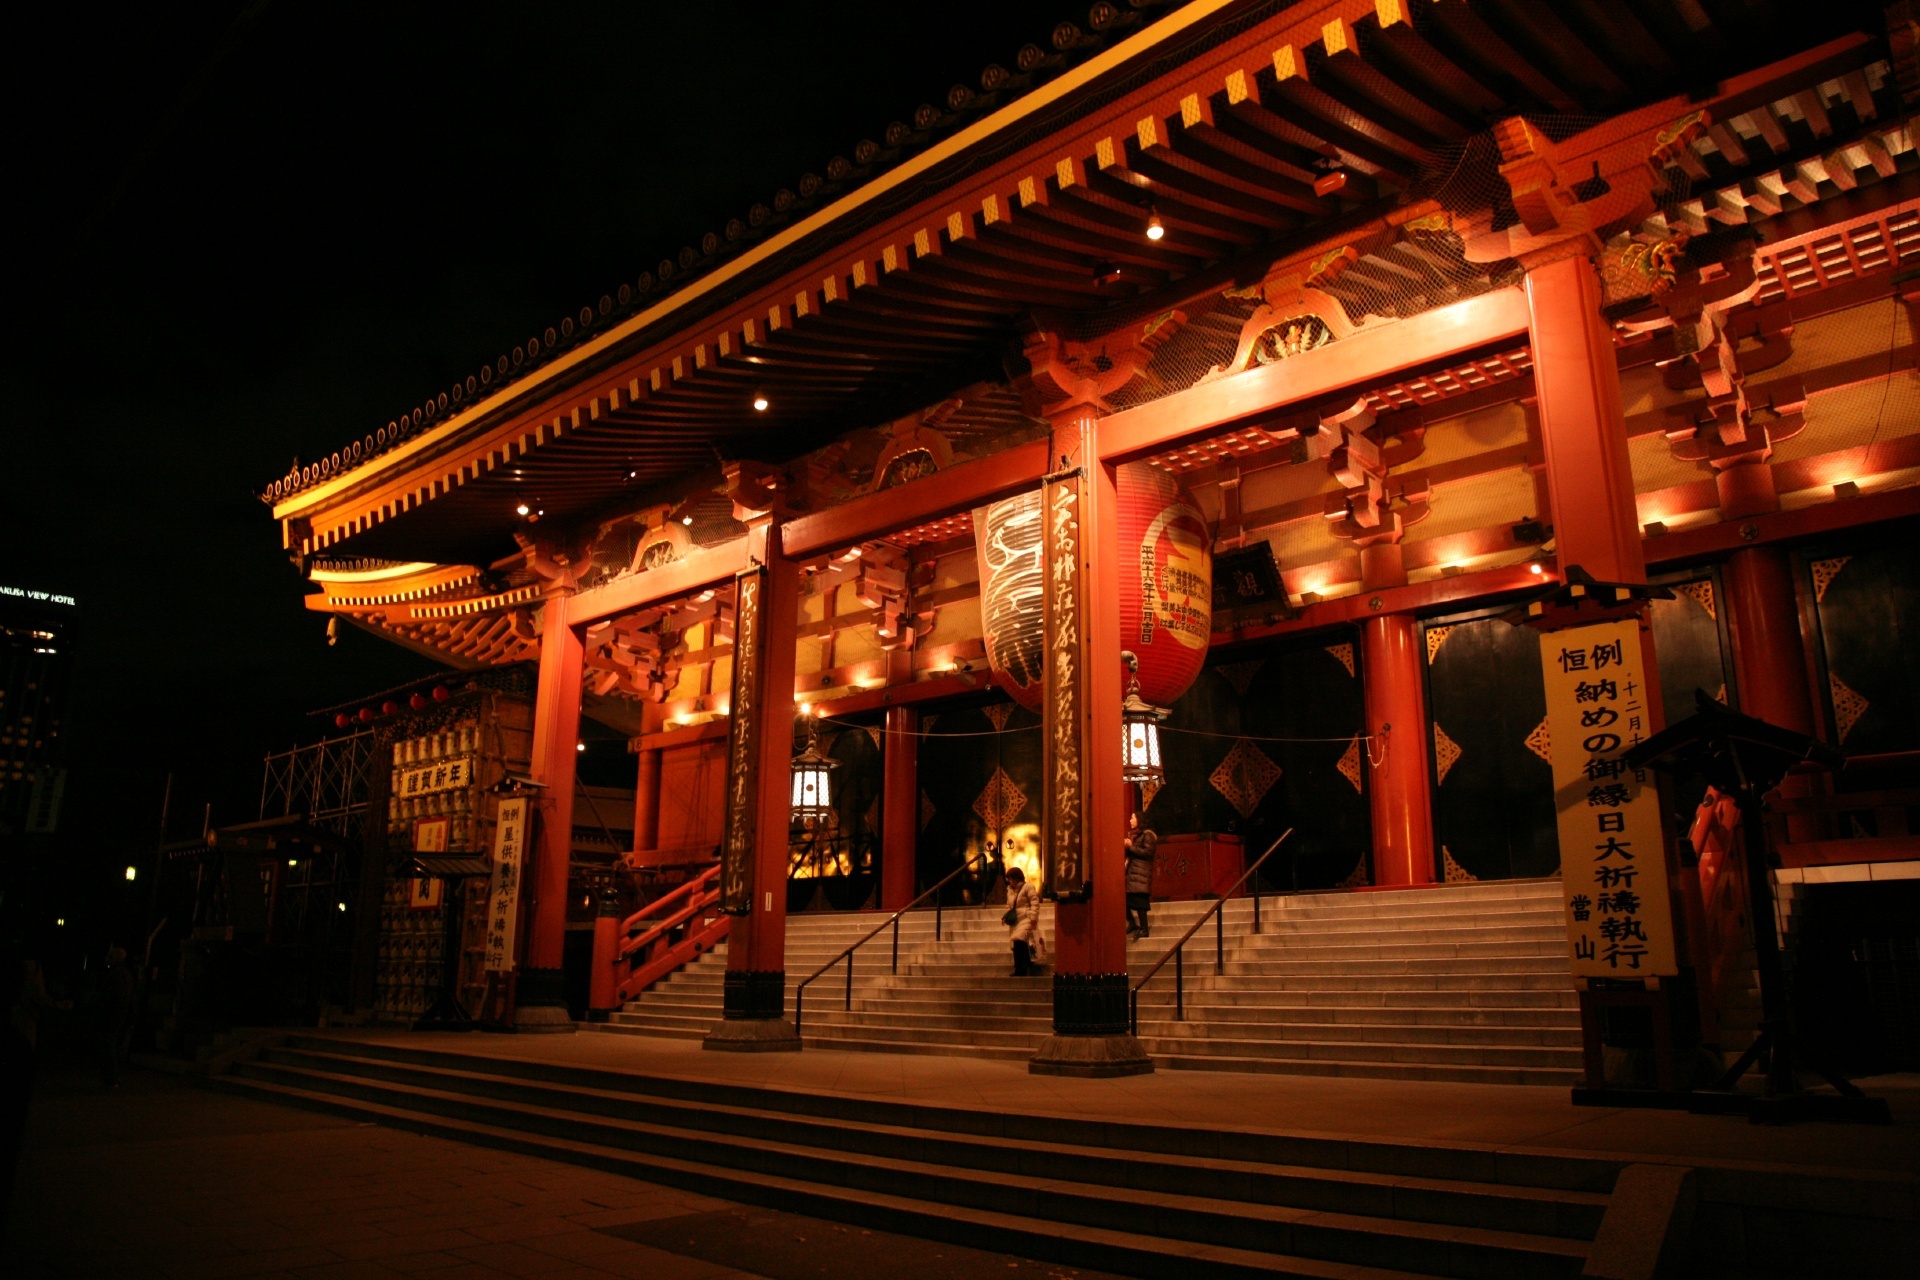 Category: Temples in Tokyo